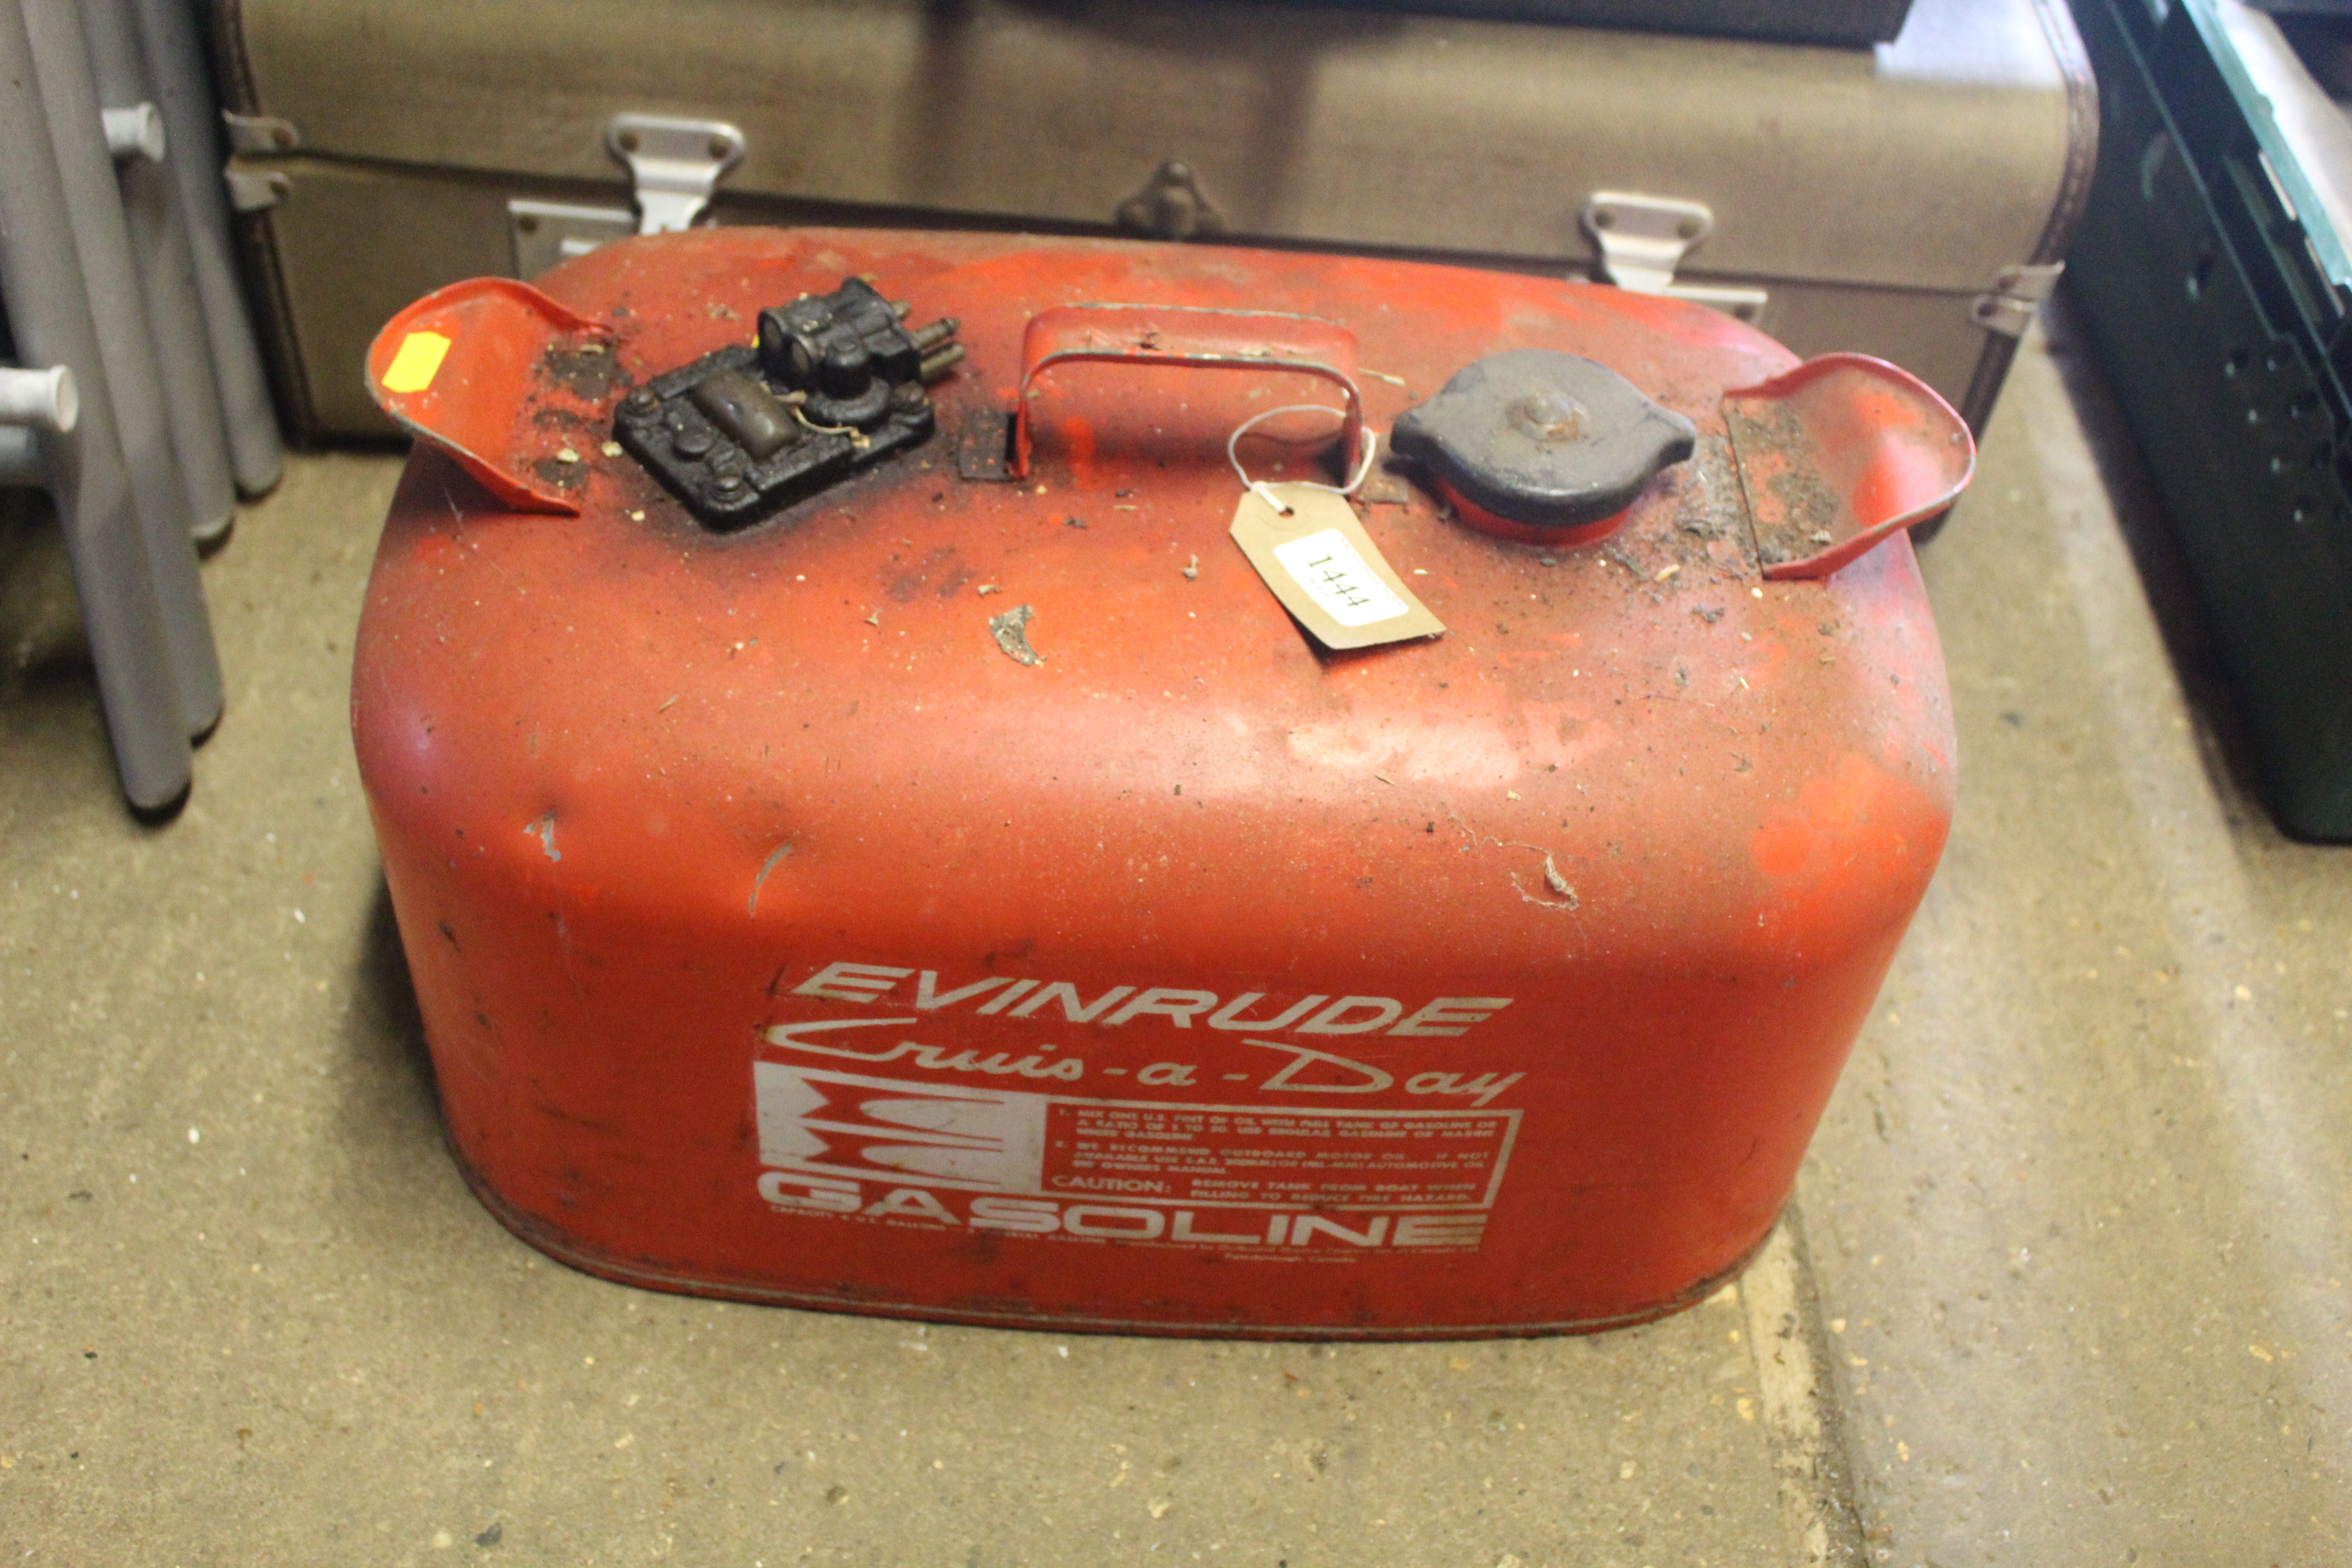 An Evinrude boat fuel five gallon can with content